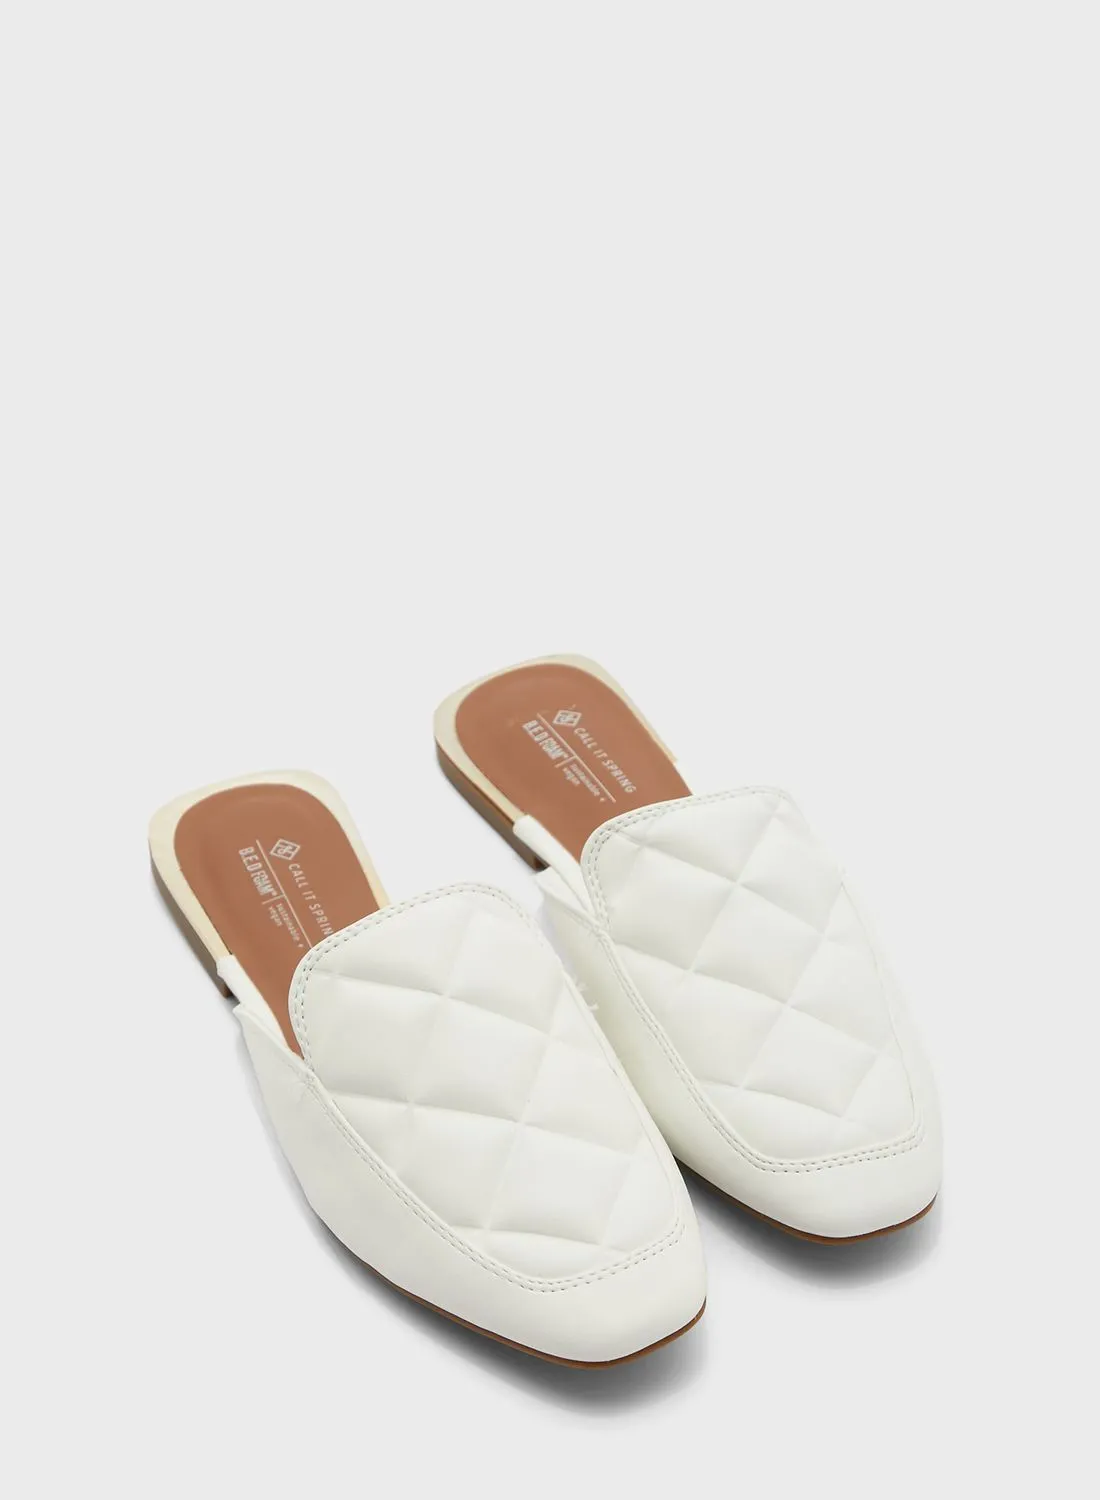 CALL IT SPRING Dollie Slip Ons